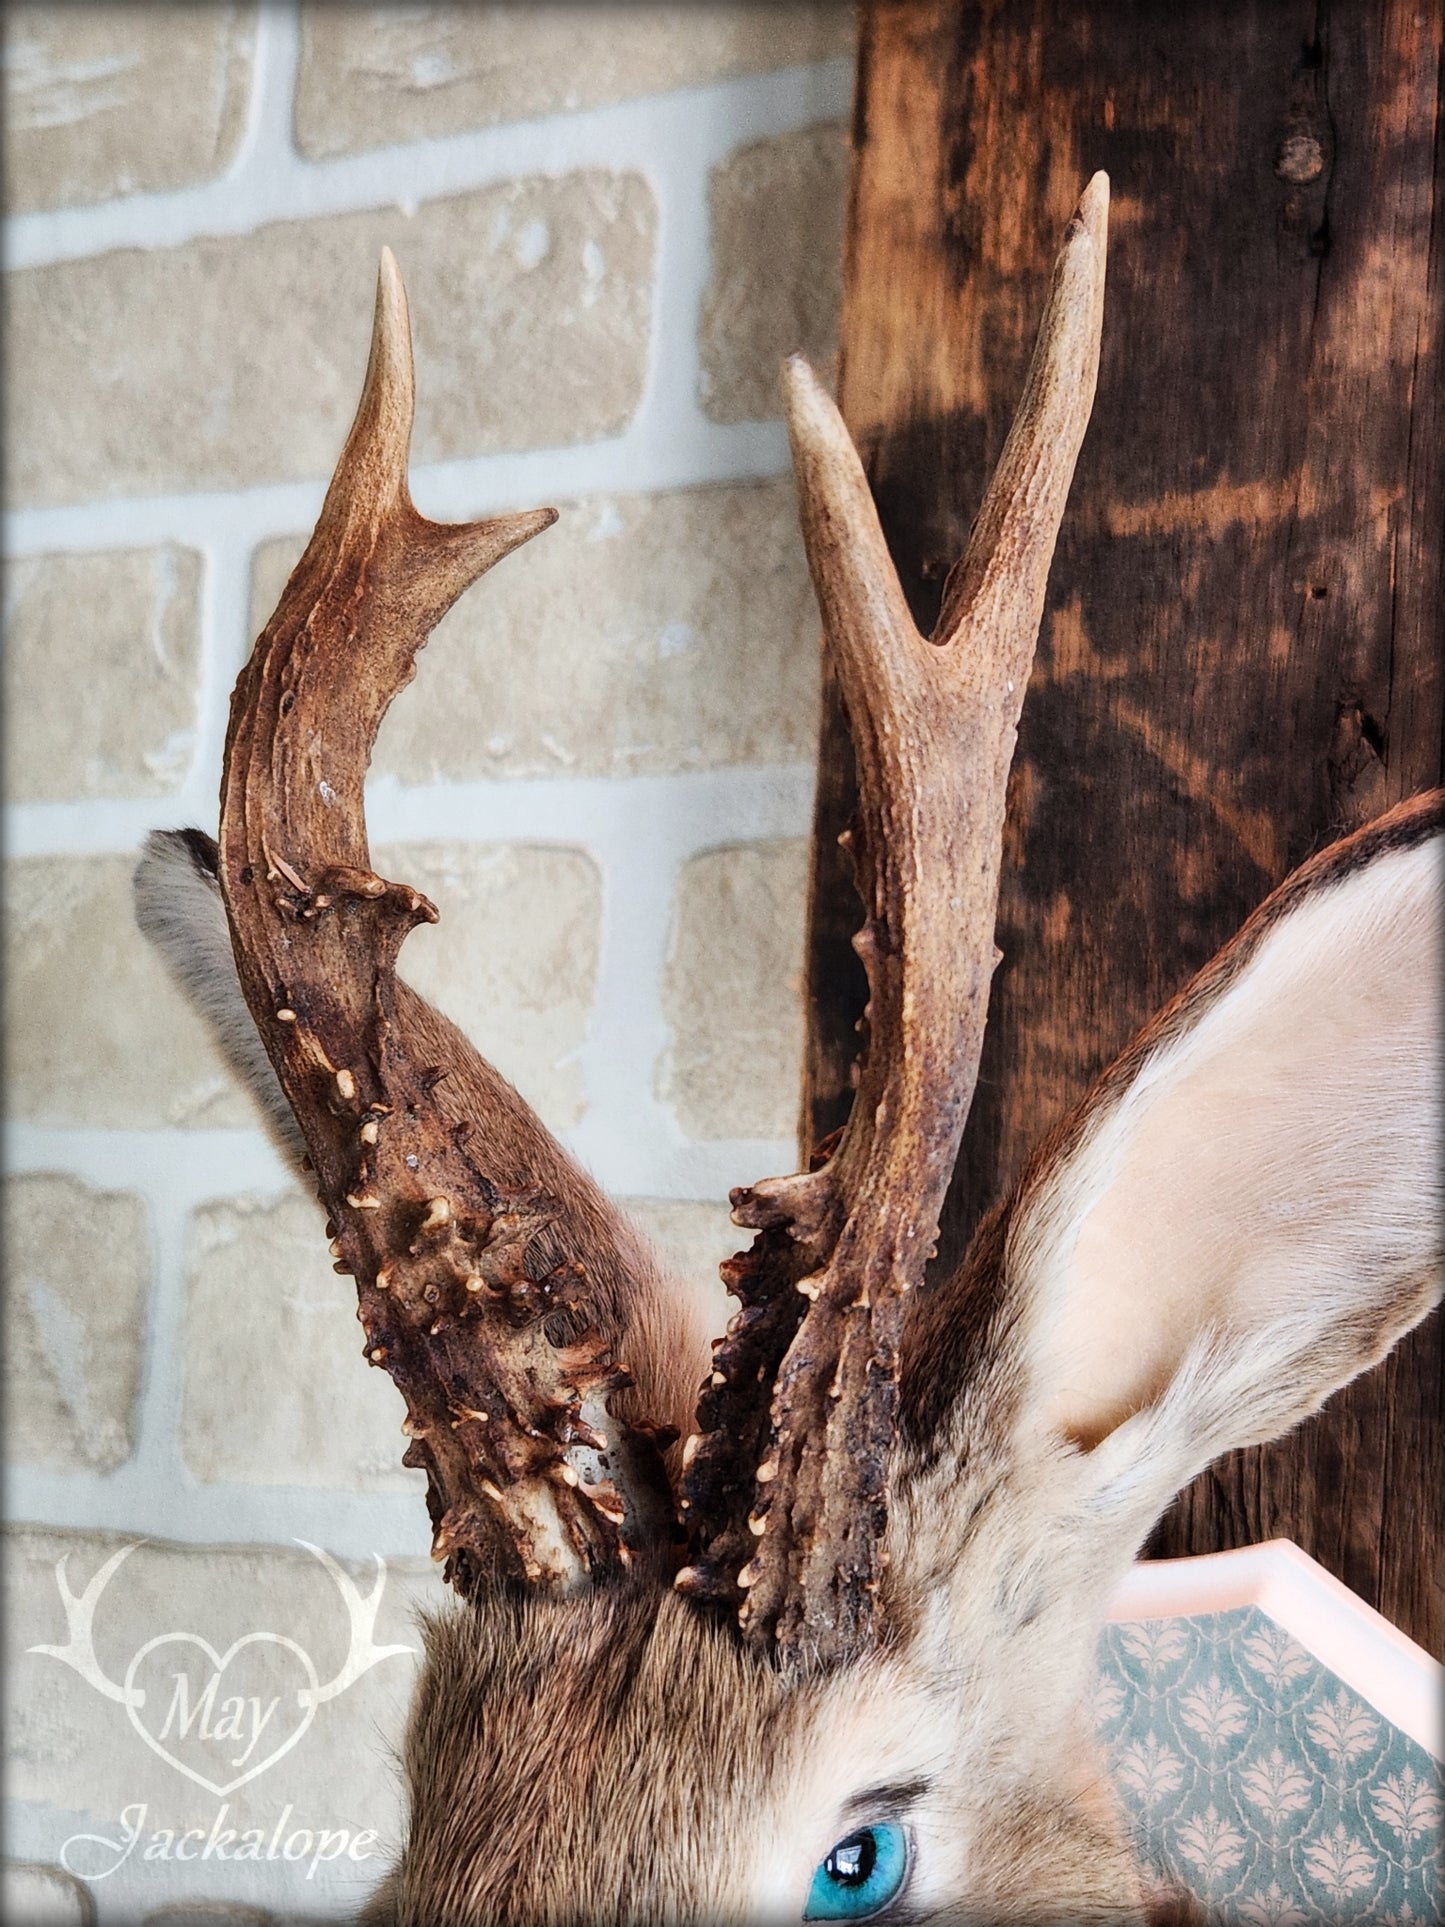 Golden Jackalope taxidermy with teal eyes, real antlers and a necklace